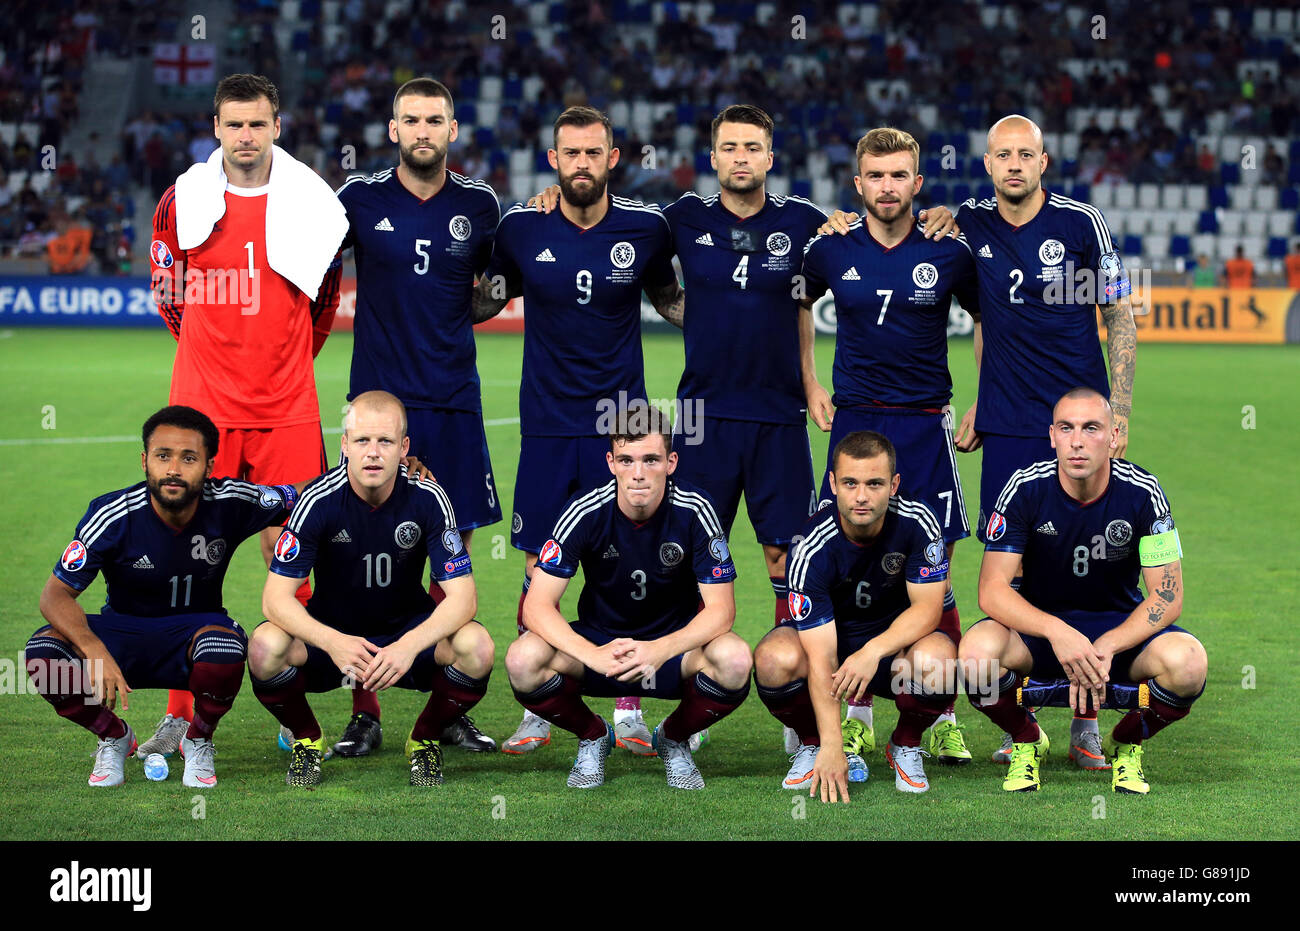 Scotland Team Group: (L-R Back Row) David Marshall, Charlie Mulgrew, Steven Fletcher, Russell Martin, James Morrison and Alan Hutton. (L-R Front Row) Iketchi Anya, Steven Naismith, Andrew Robertson, Shaun Maloney and Scott Brown during the UEFA European Championship Qualifying match at the Boris Paichadze Dinamo Arena, Tbilisi. Picture date: Friday September 4, 2015. See PA story SOCCER Georgia. Photo credit should read: Nick Potts/PA Wire. RESTRICTIONS: Use subject to restrictions. . Commercial use only with prior written consent of the Scottish FA. Call +44 (0)1158 447447 for further Stock Photo